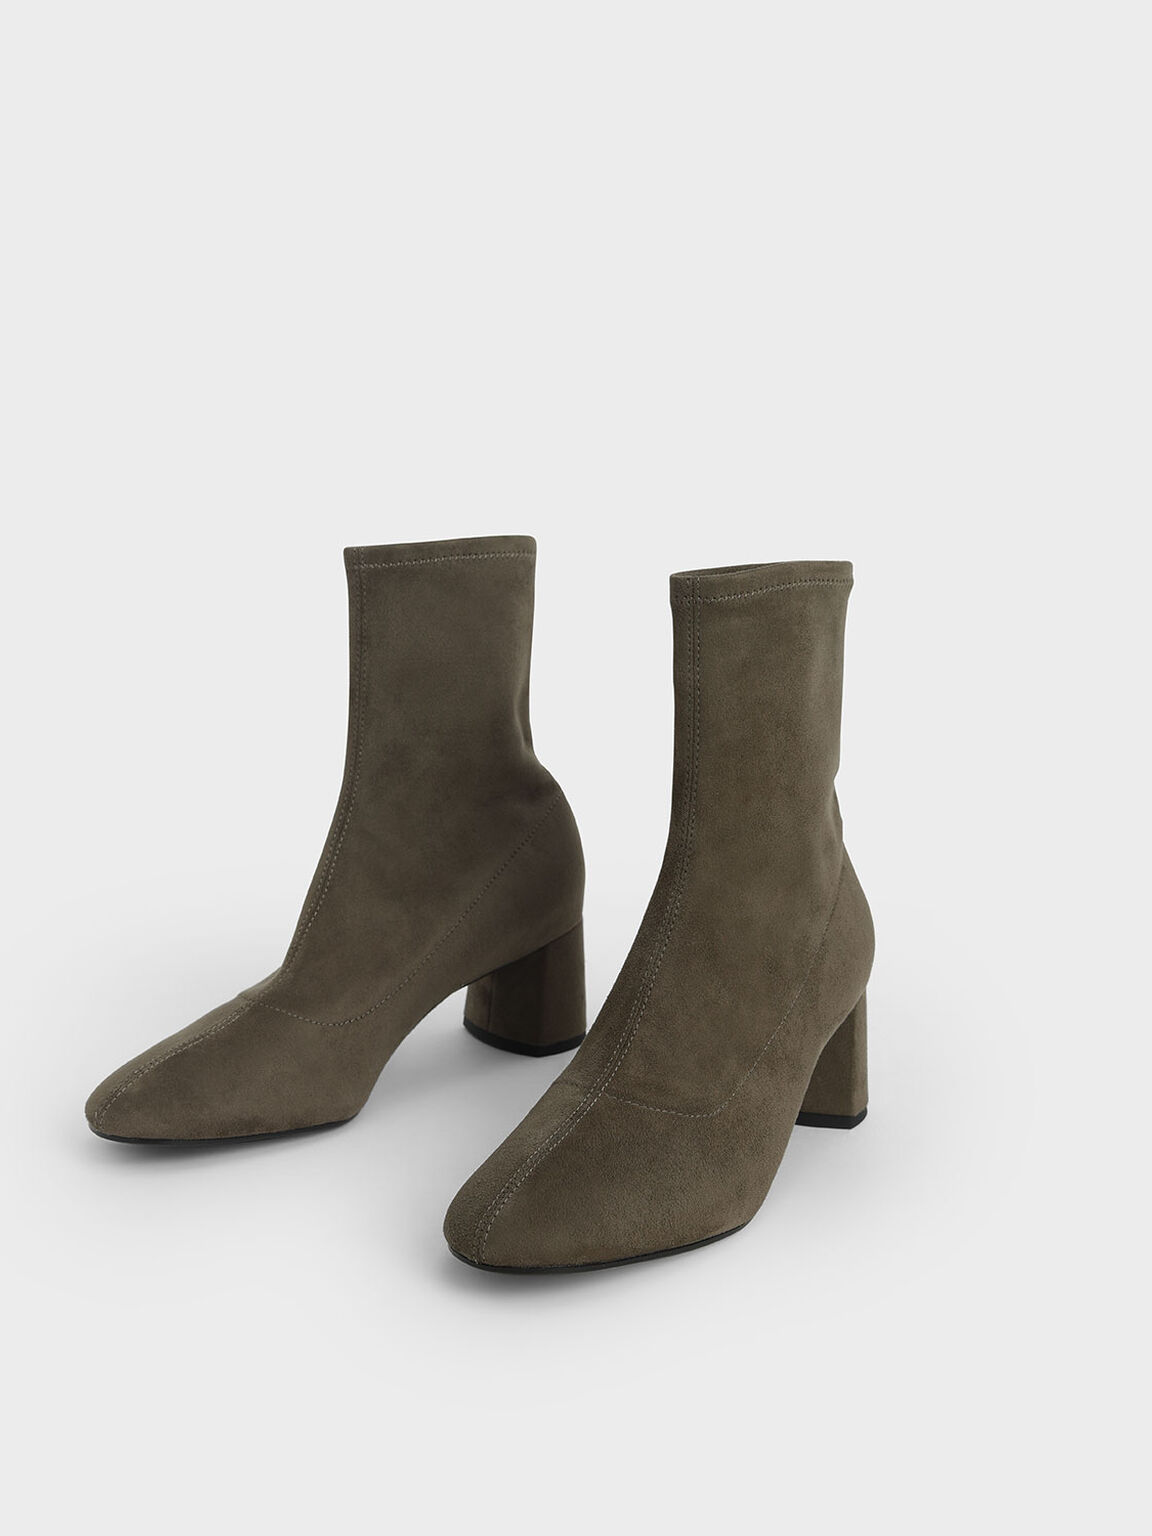 Textured Sculptural Heel Ankle Boots, Military Green, hi-res